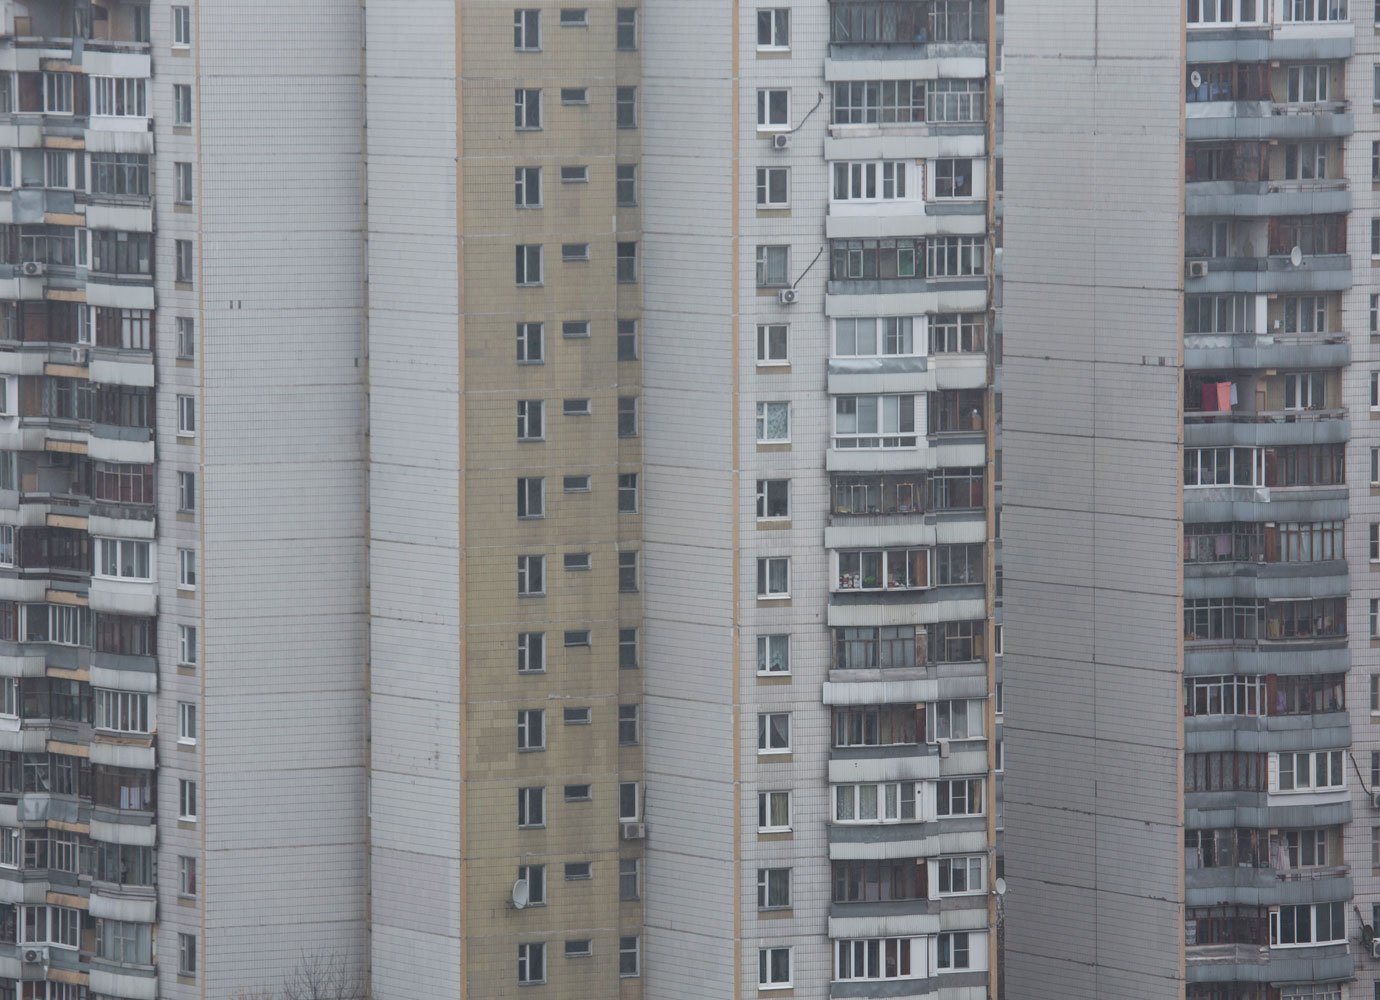 How one Russian filmmaker captured the soundtrack to life in Moscow’s Soviet prefab housing